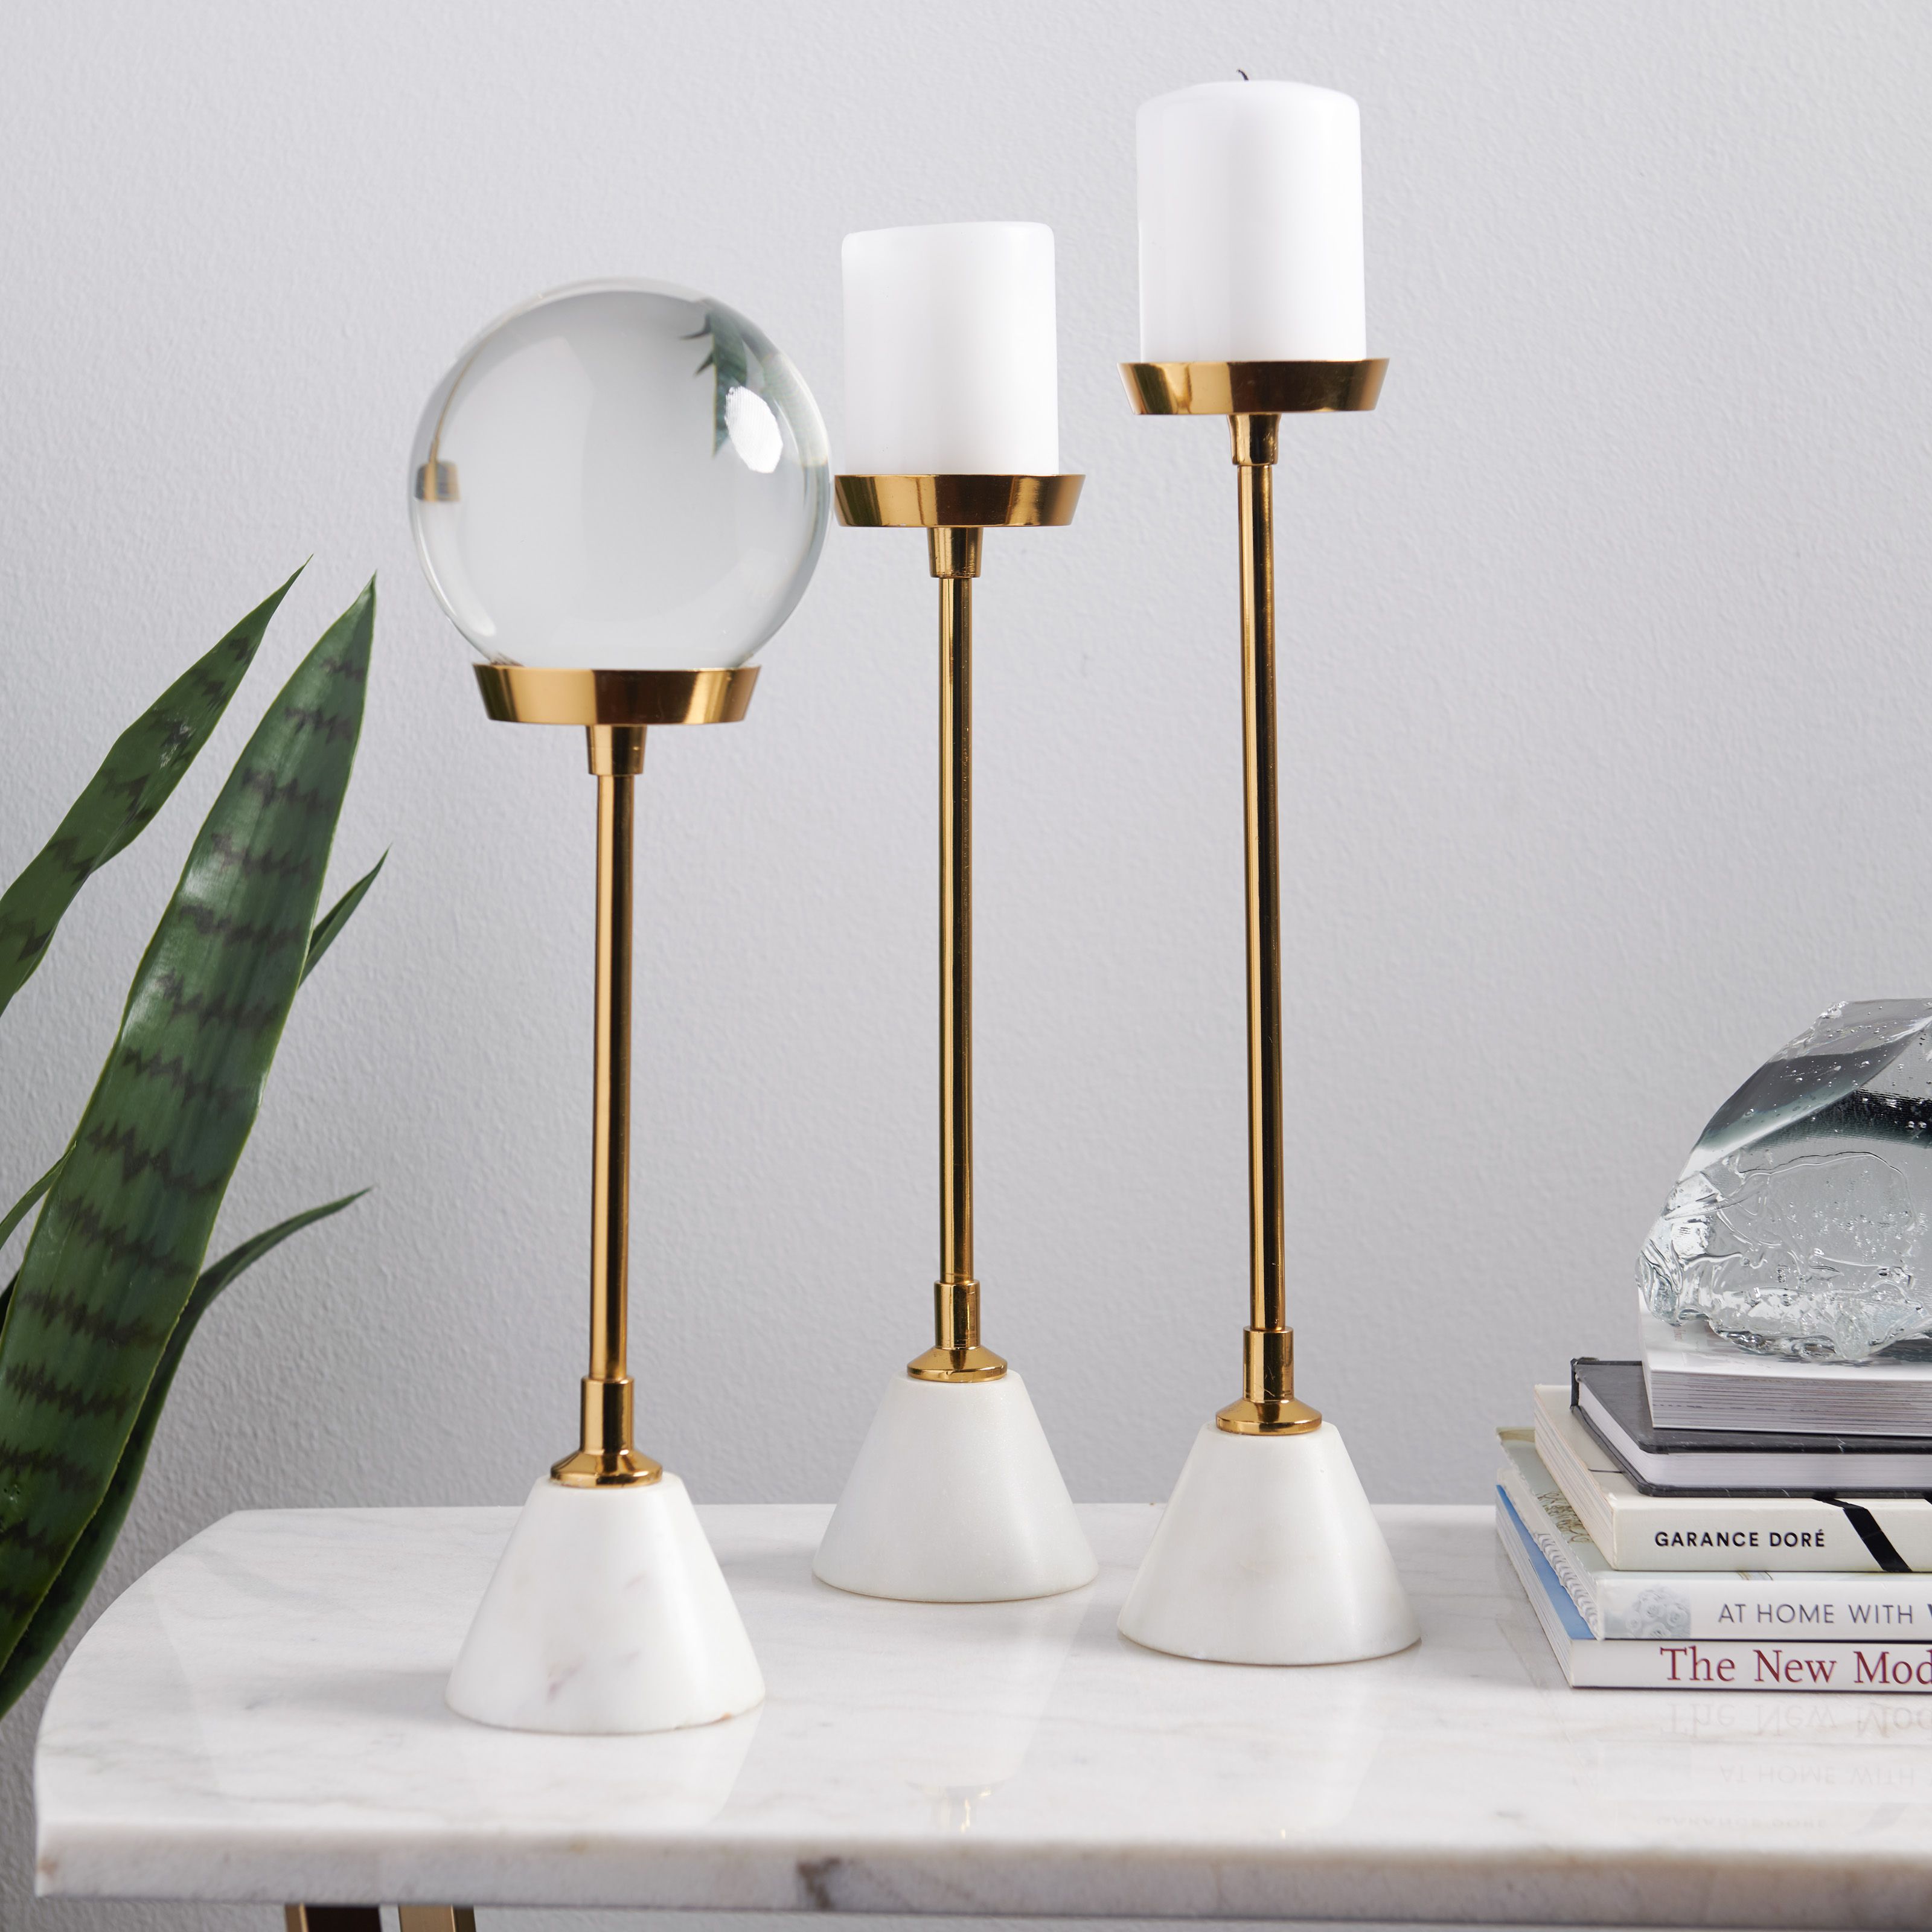 Set of 3 Marble and Brass Candle Holders